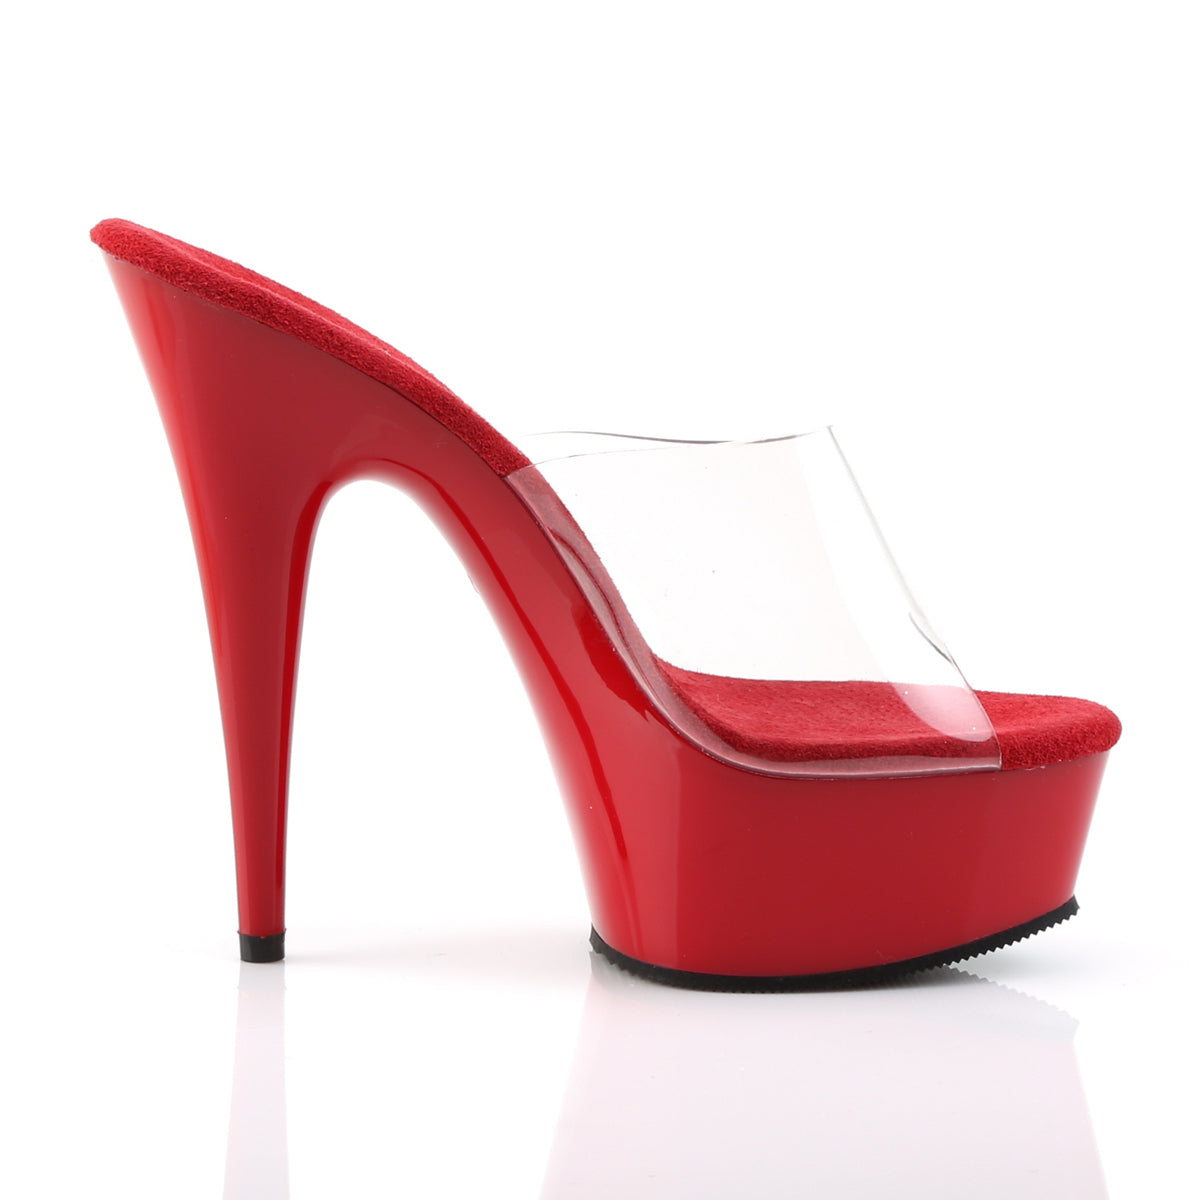 PLEASER DELIGHT-601 RED CLEAR 6 INCH HIGH HEEL PLATFORM SHOES SIZE 8